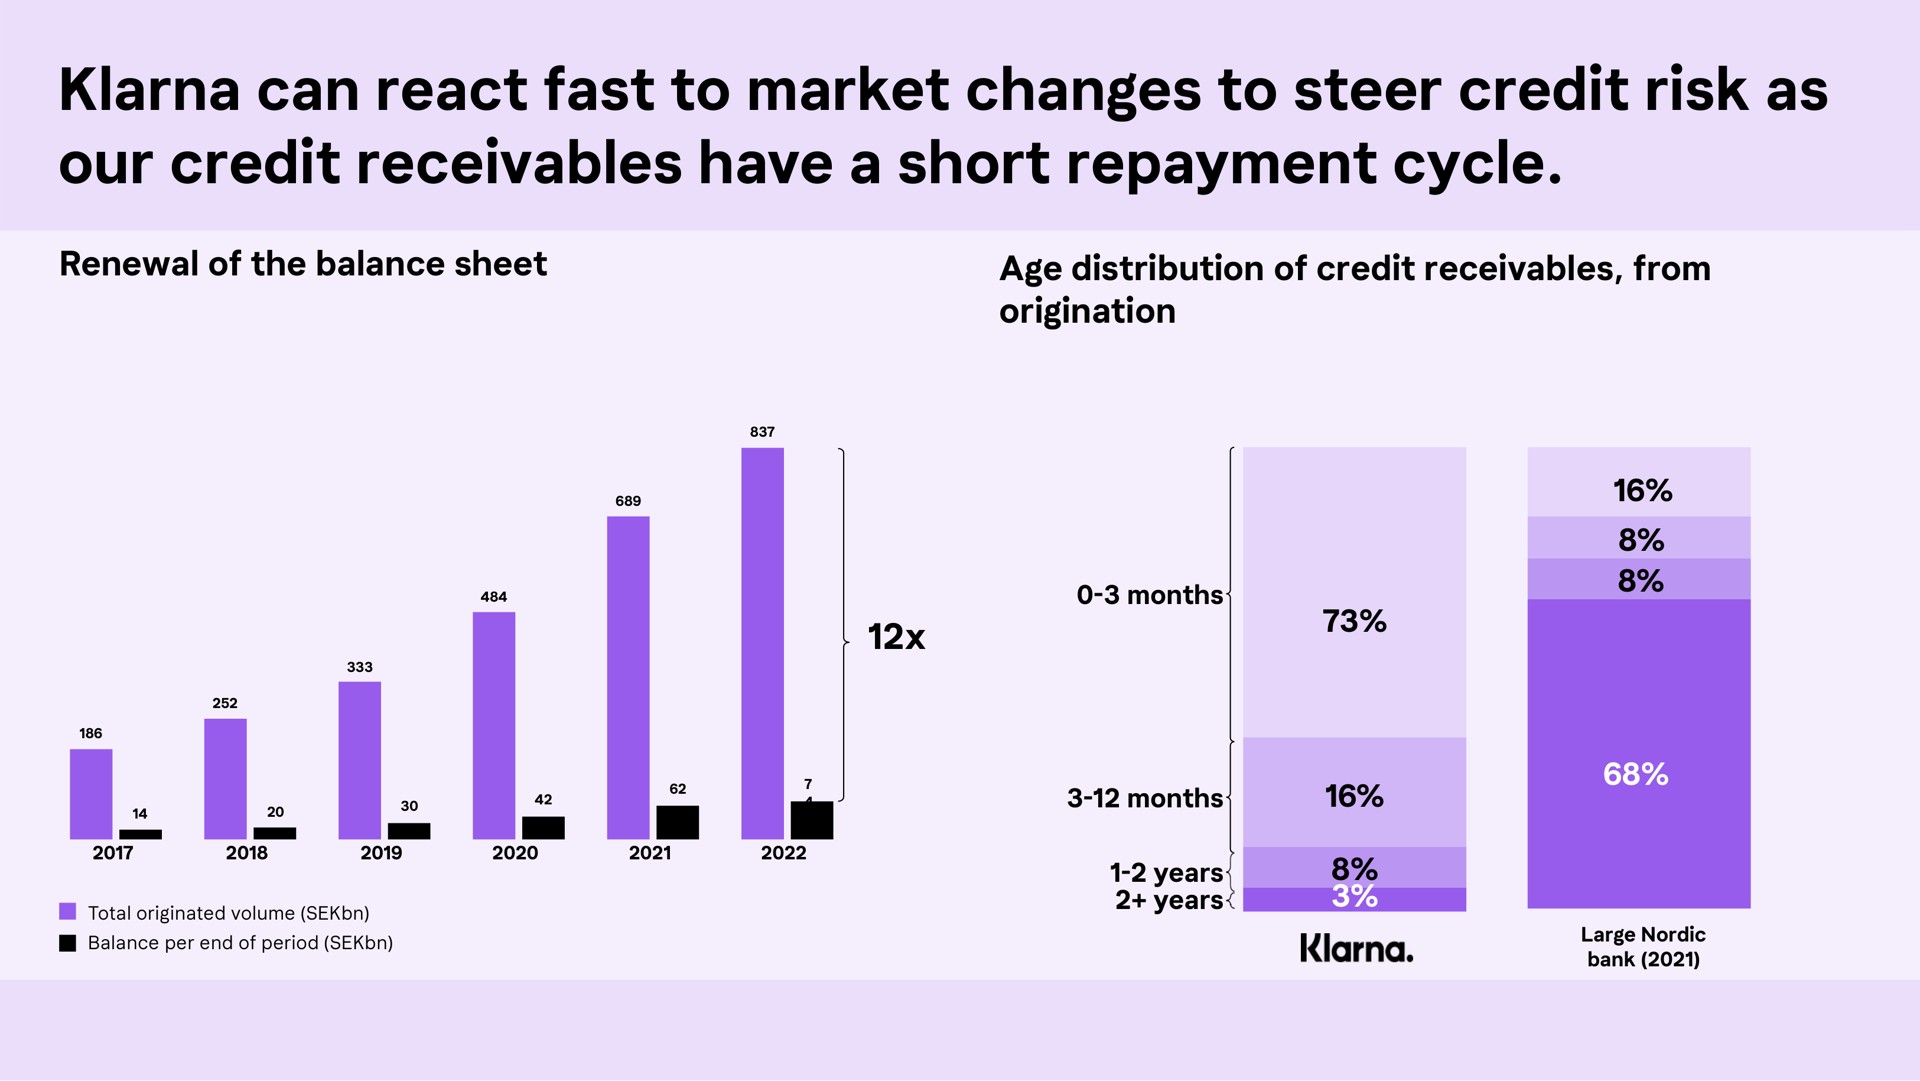 can react fast to market changes to steer credit risk as our credit receivables have a short repayment cycle | Klarna